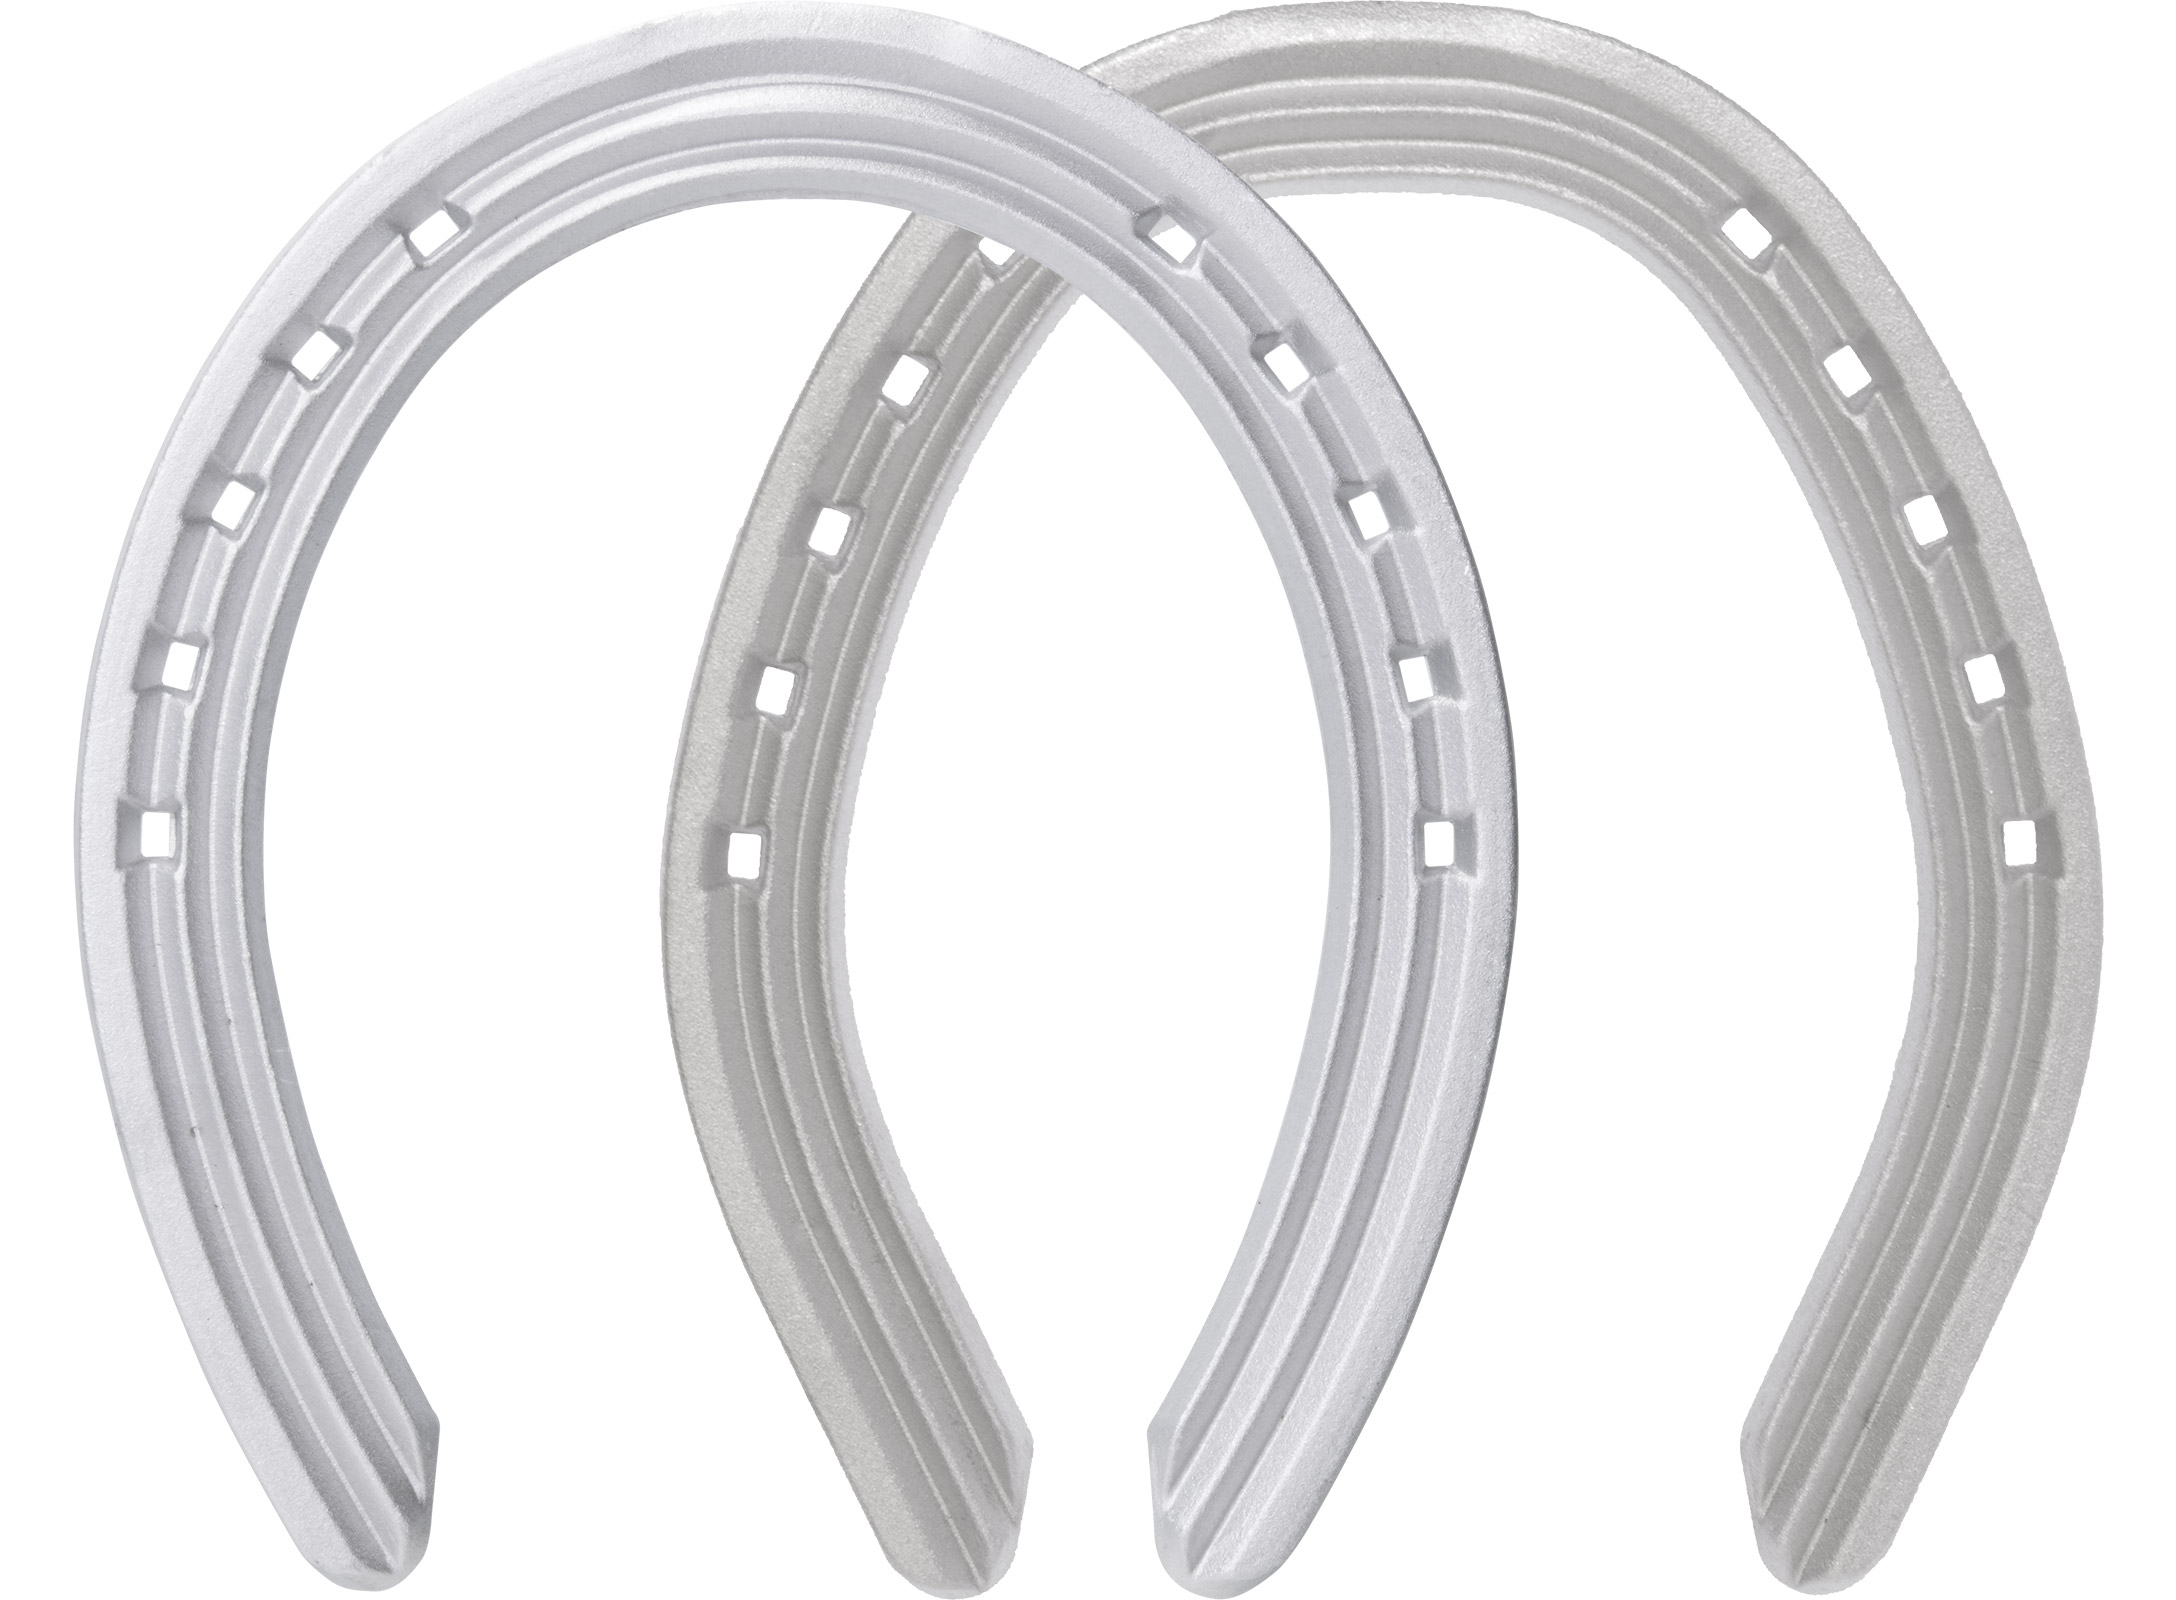 St. Croix Ultra Lite Aluminium horseshoes, front and hind, bottom side view